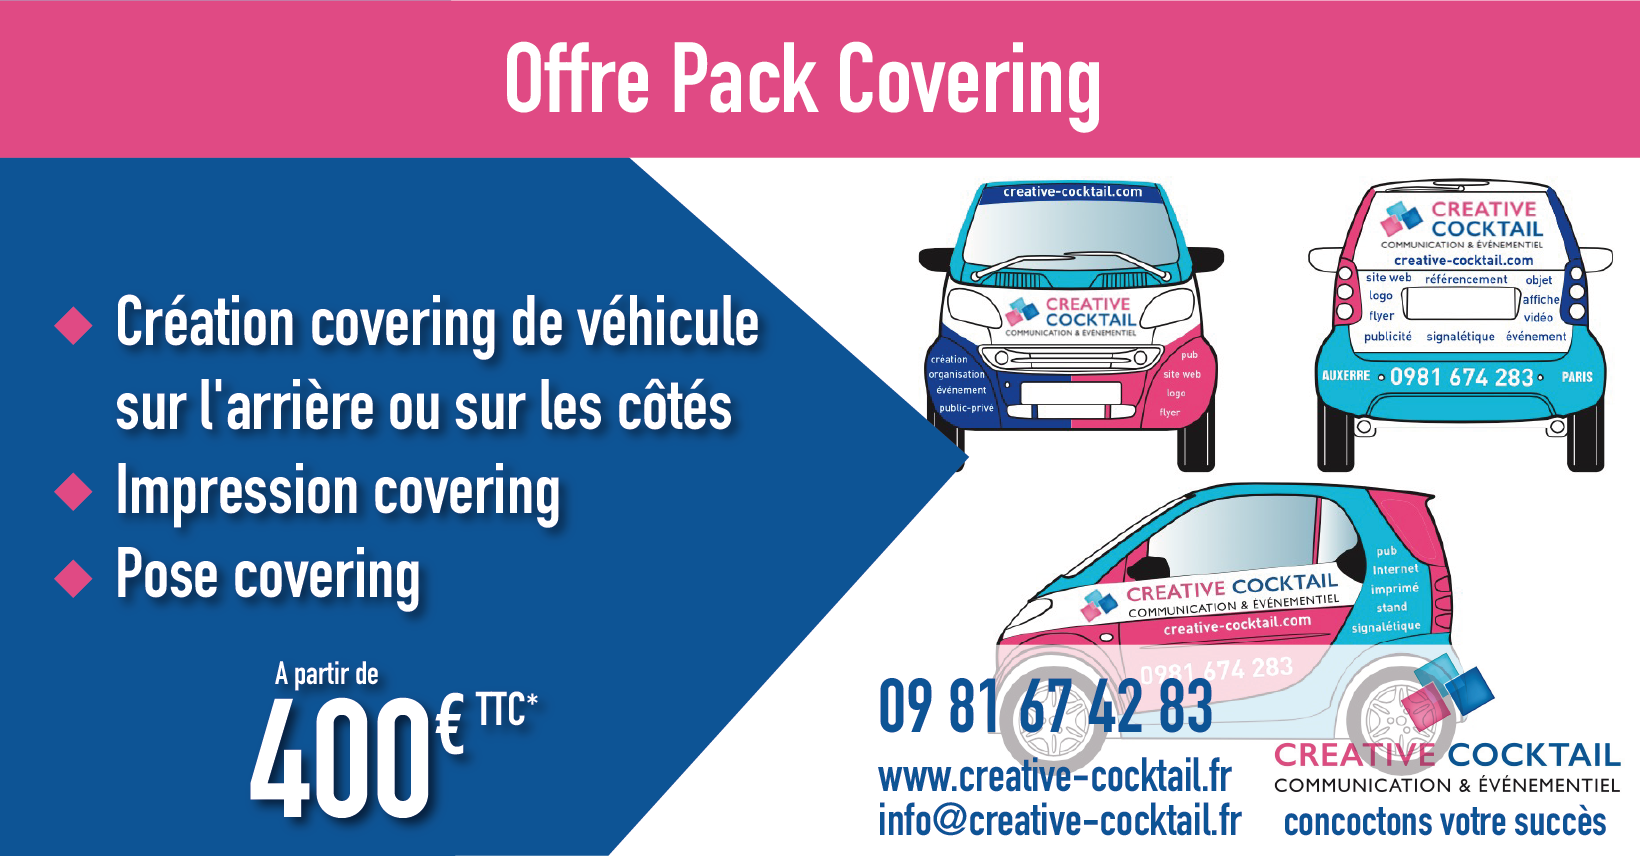 Offre Pack Covering